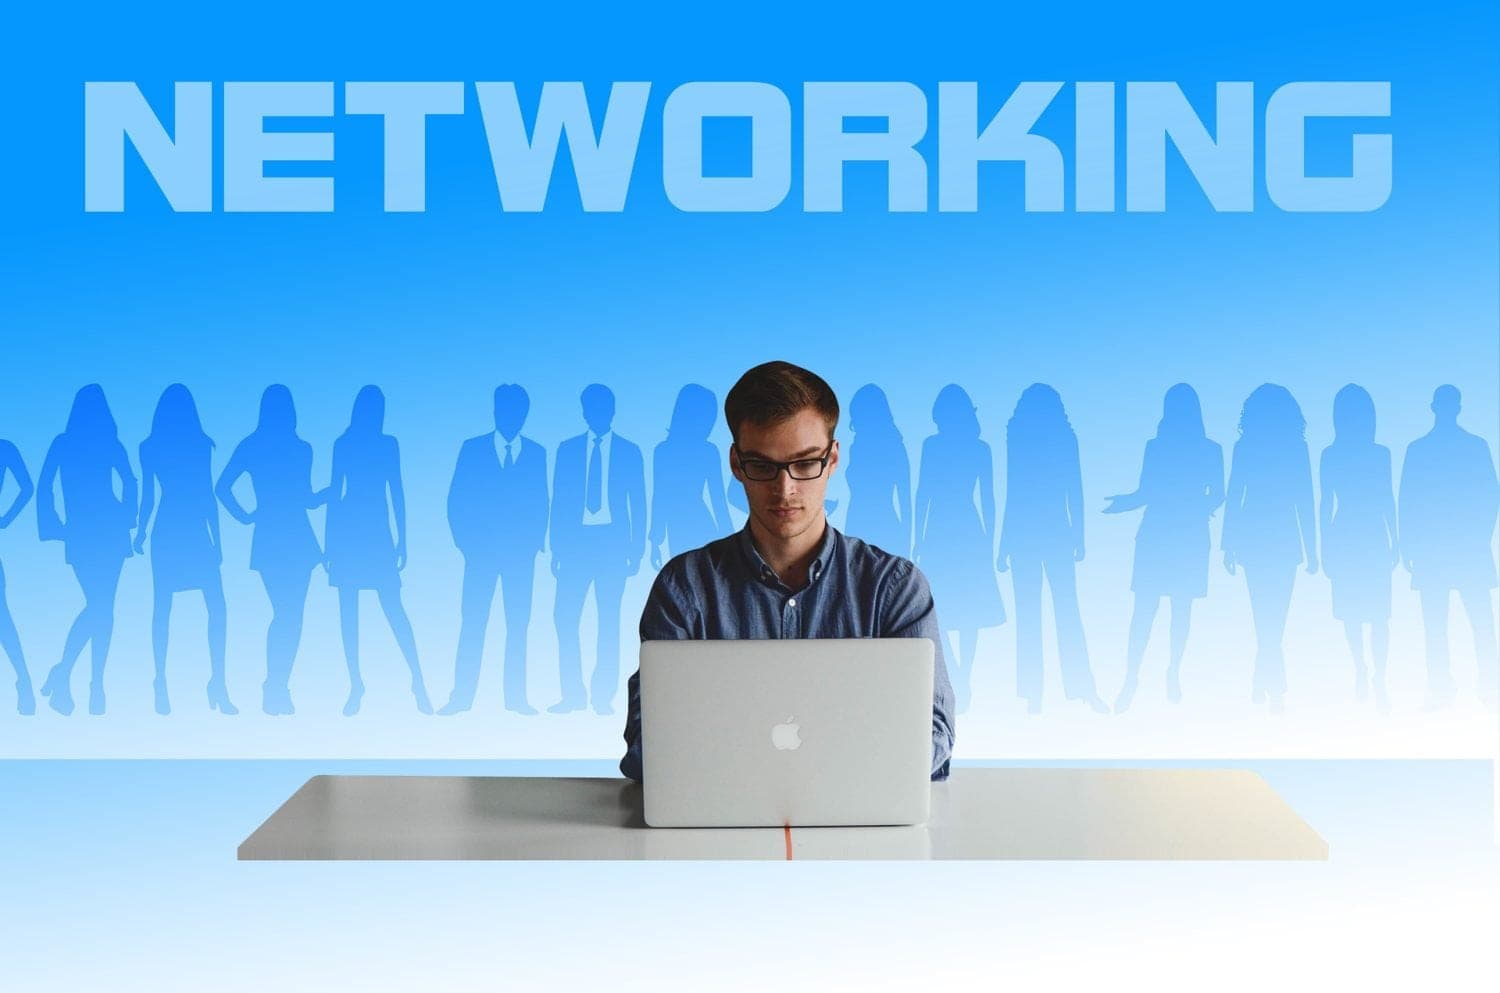 How to leverage powerful networking secrets